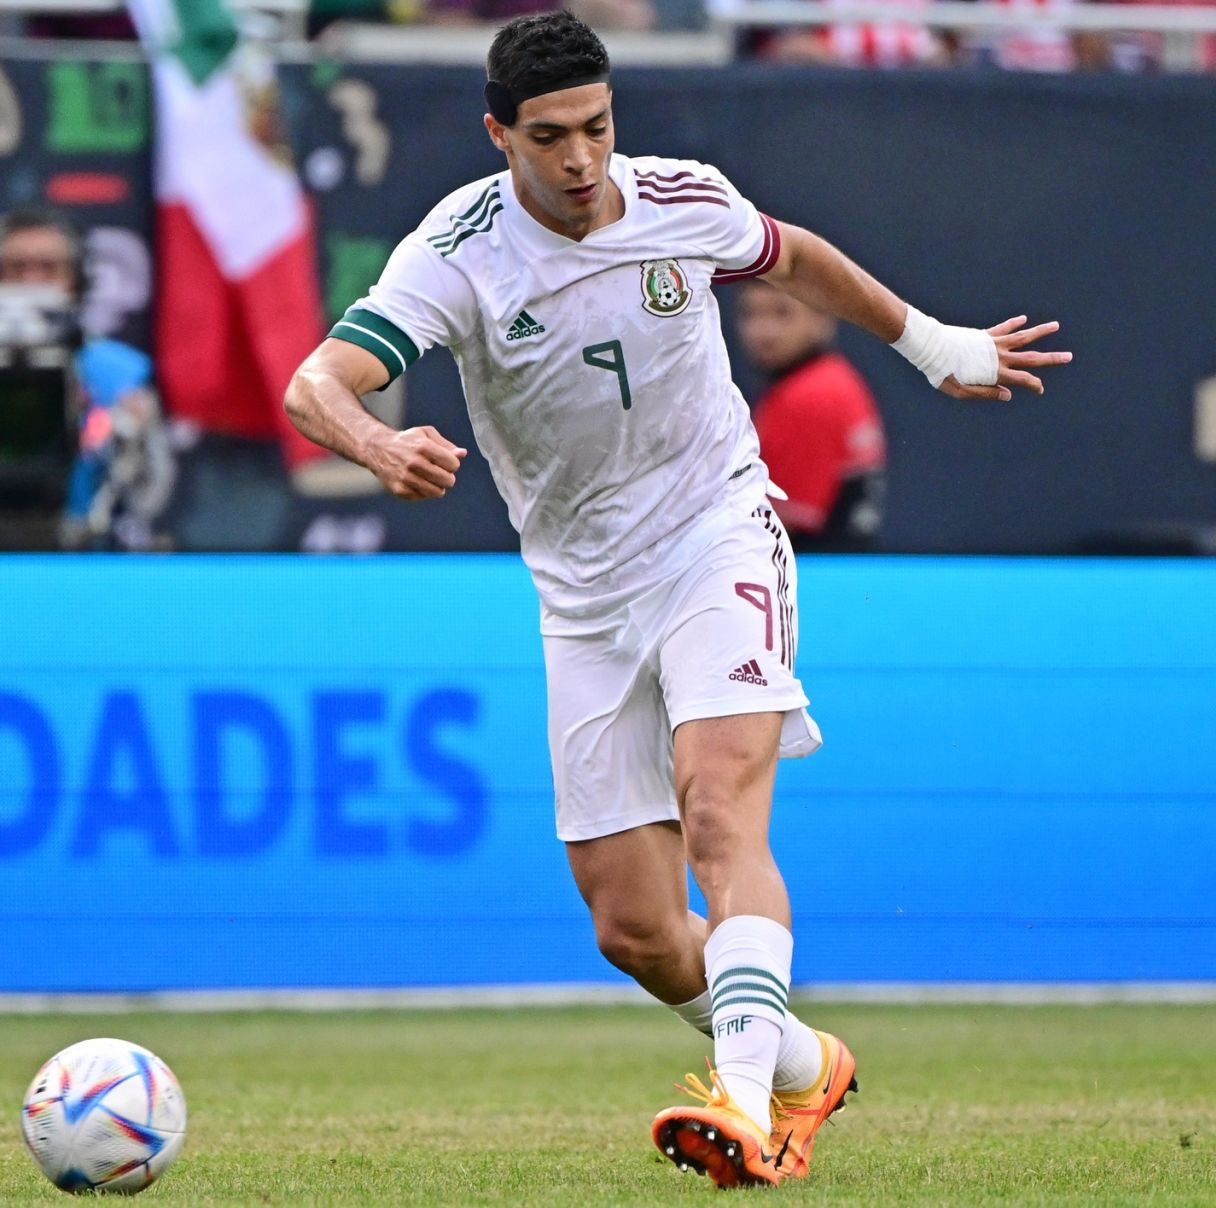 Raul Jimenez dribbles dangerously with the ball. Pic: Quinn Harris-USA TODAY Sports